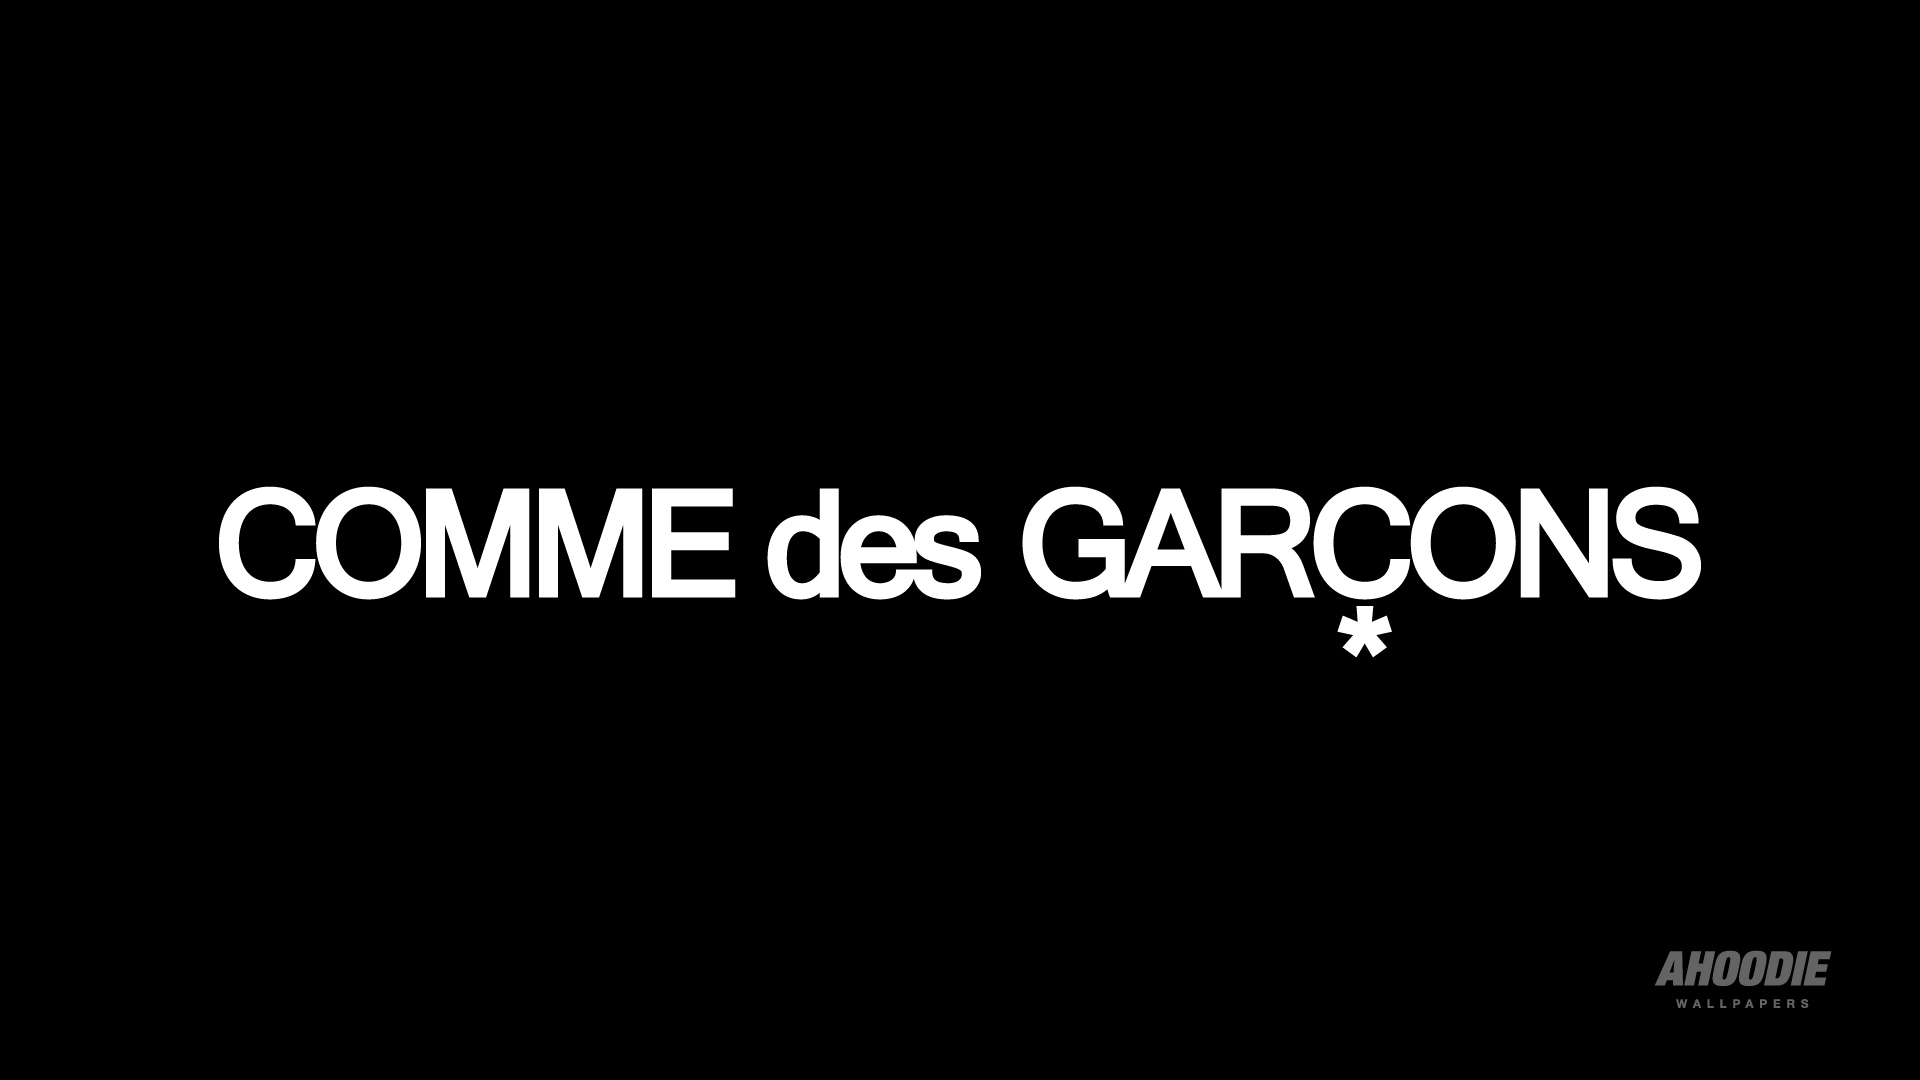 Comme des Garçons Story, History, Founder, CEO. Fashion